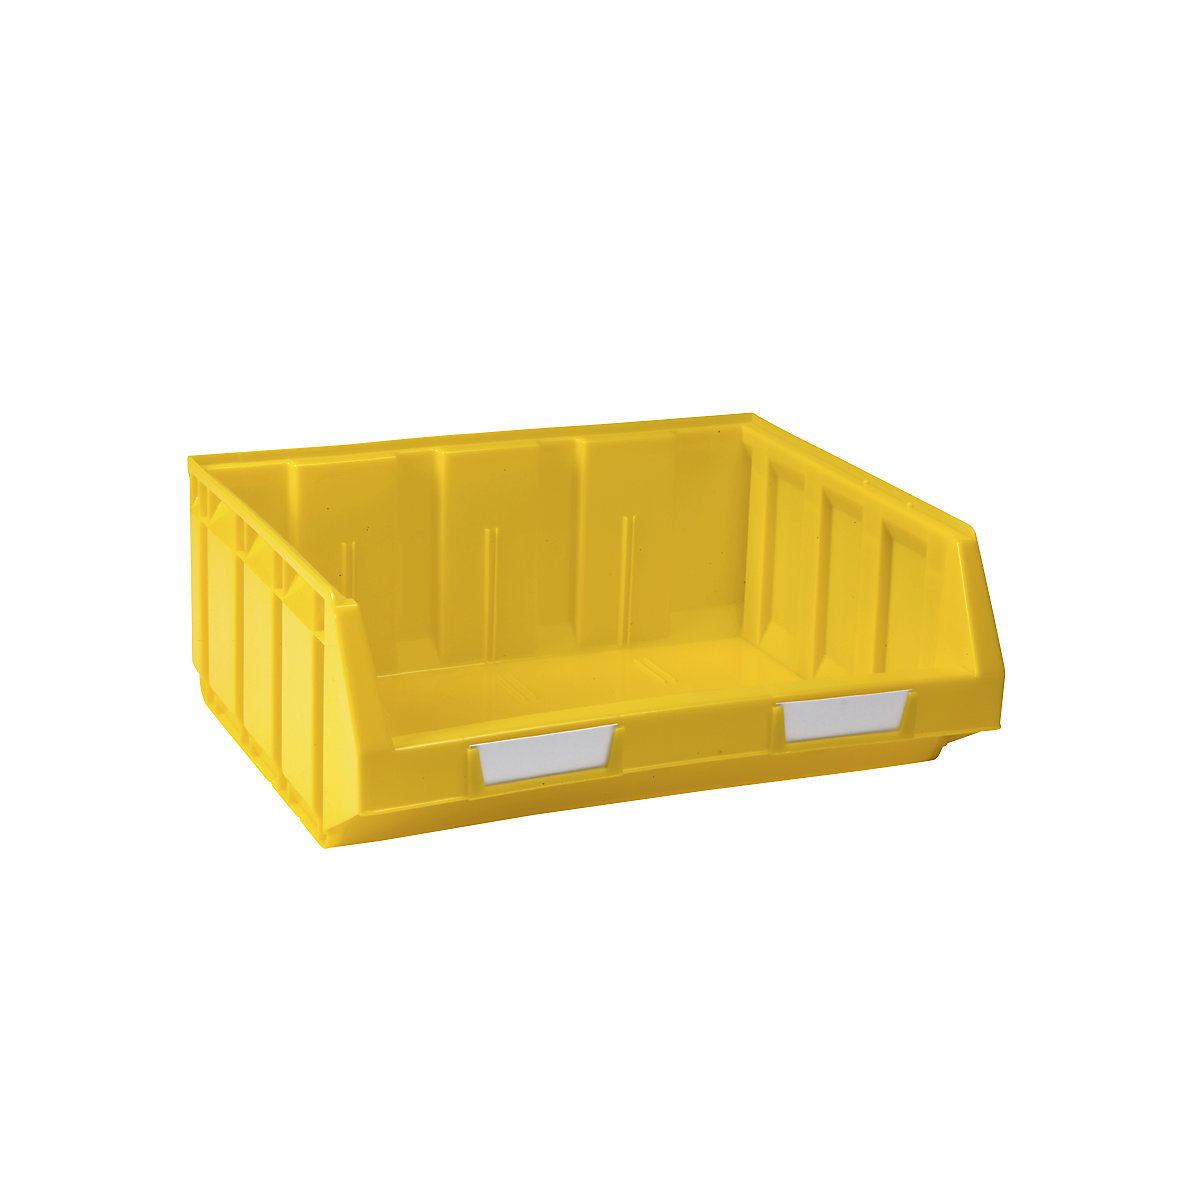 Open fronted storage bin made of polyethylene, LxWxH 345 x 410 x 164 mm, yellow, pack of 8-10